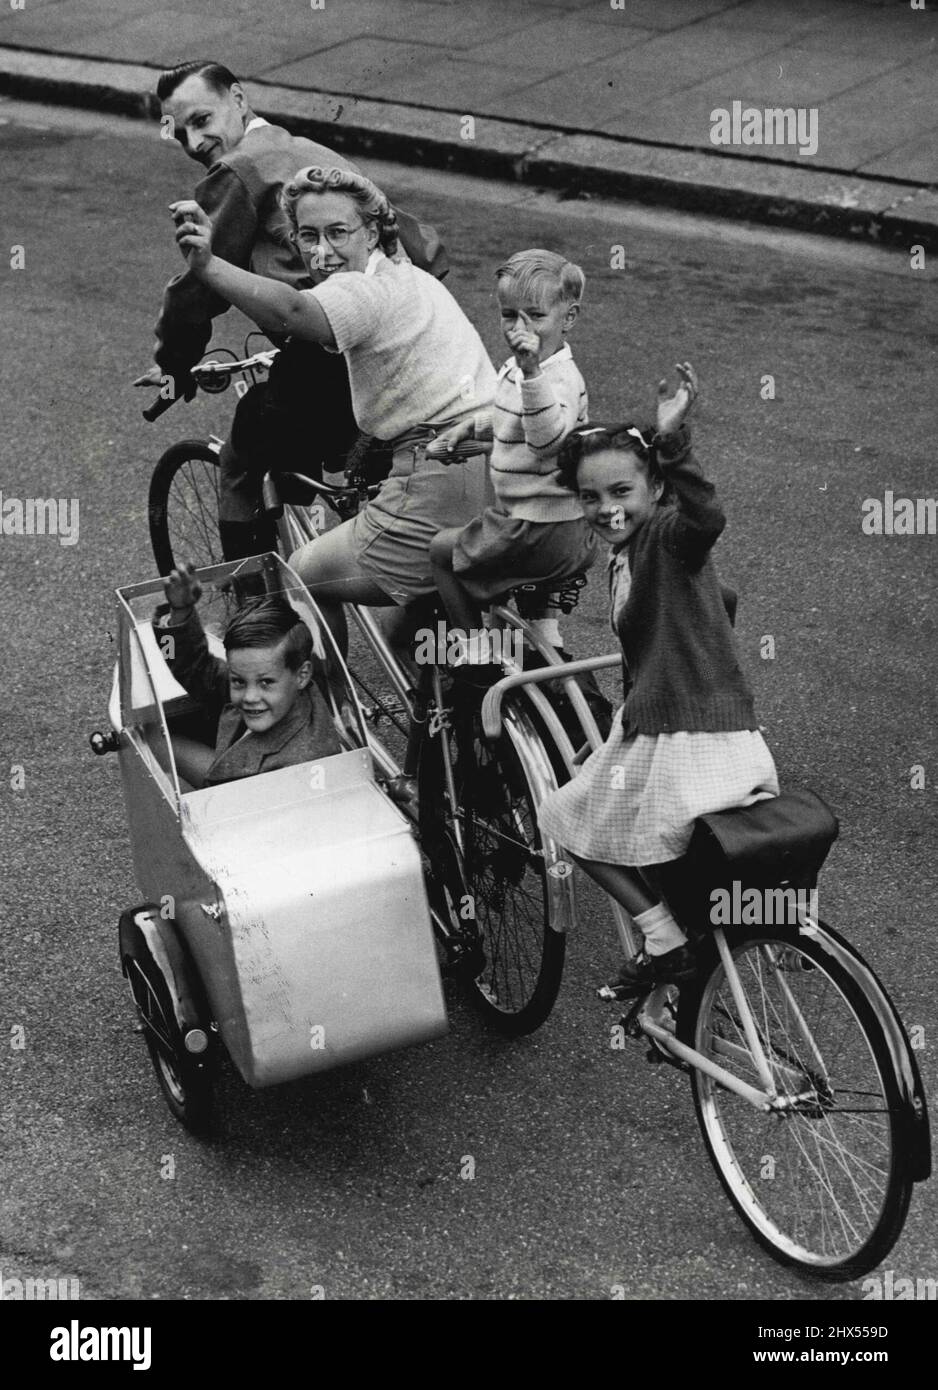 A 'Carriage' For Five Mr. Eric Jewell of Finchley, London, was fed up with queueing for buses with tired children, so with his wife, he went back to his hobby of cycling. He built a sidecar and added to his tandem - bicycle. But this was not enough to hold all the family so half a bicycle was tacked on behind and an extra saddle and a pair of hadlebars placed behind mother - now he has a quinticycle made for five and the family are all happy as they travel around together. August 08, 1950. (Photo by Paul Popper Ltd.). Stock Photo